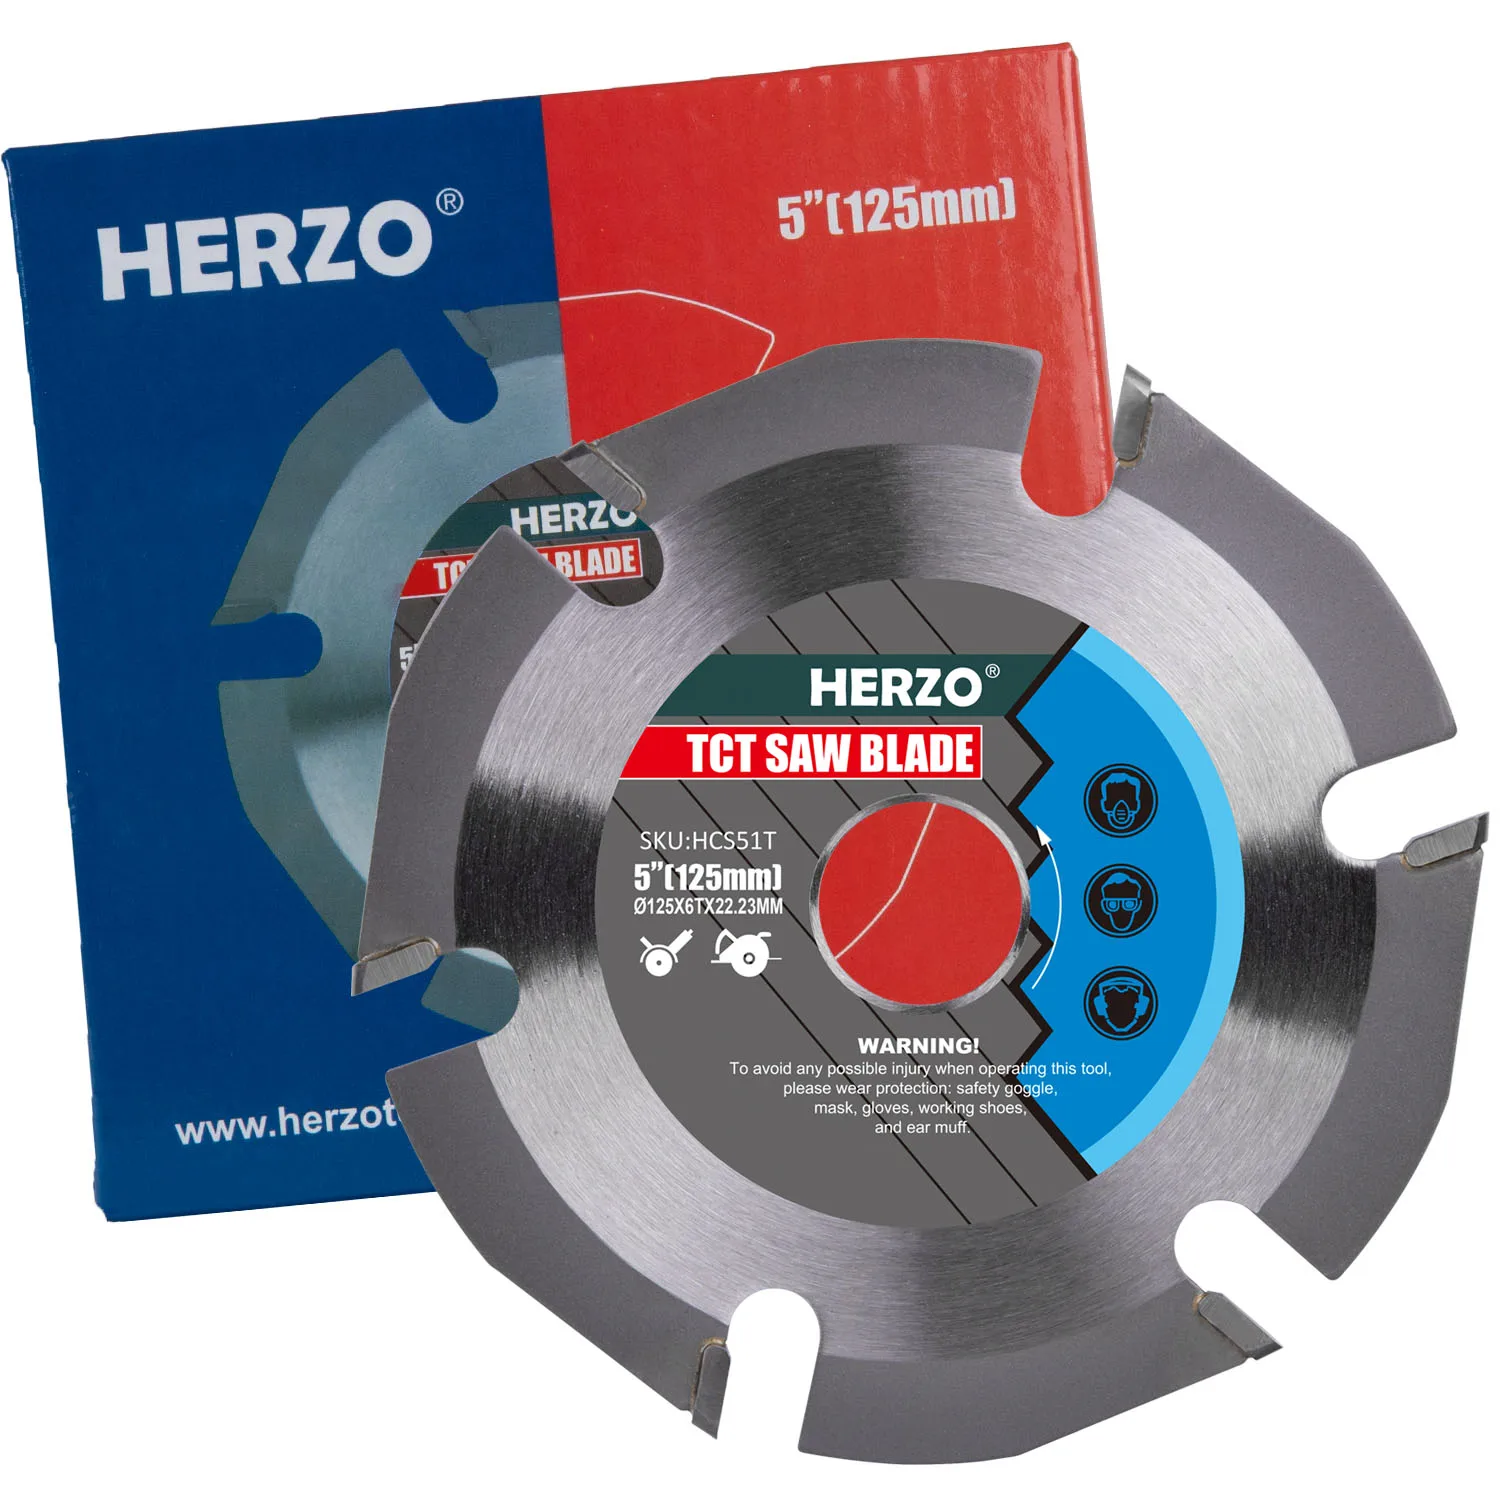 HERZO 125mm 6 Teeth Wood Cutting Disc Woodworking Tools Angle Grinder Saw Carbide Tipped Cutting Blade For Metal HCS5.1T enlarge